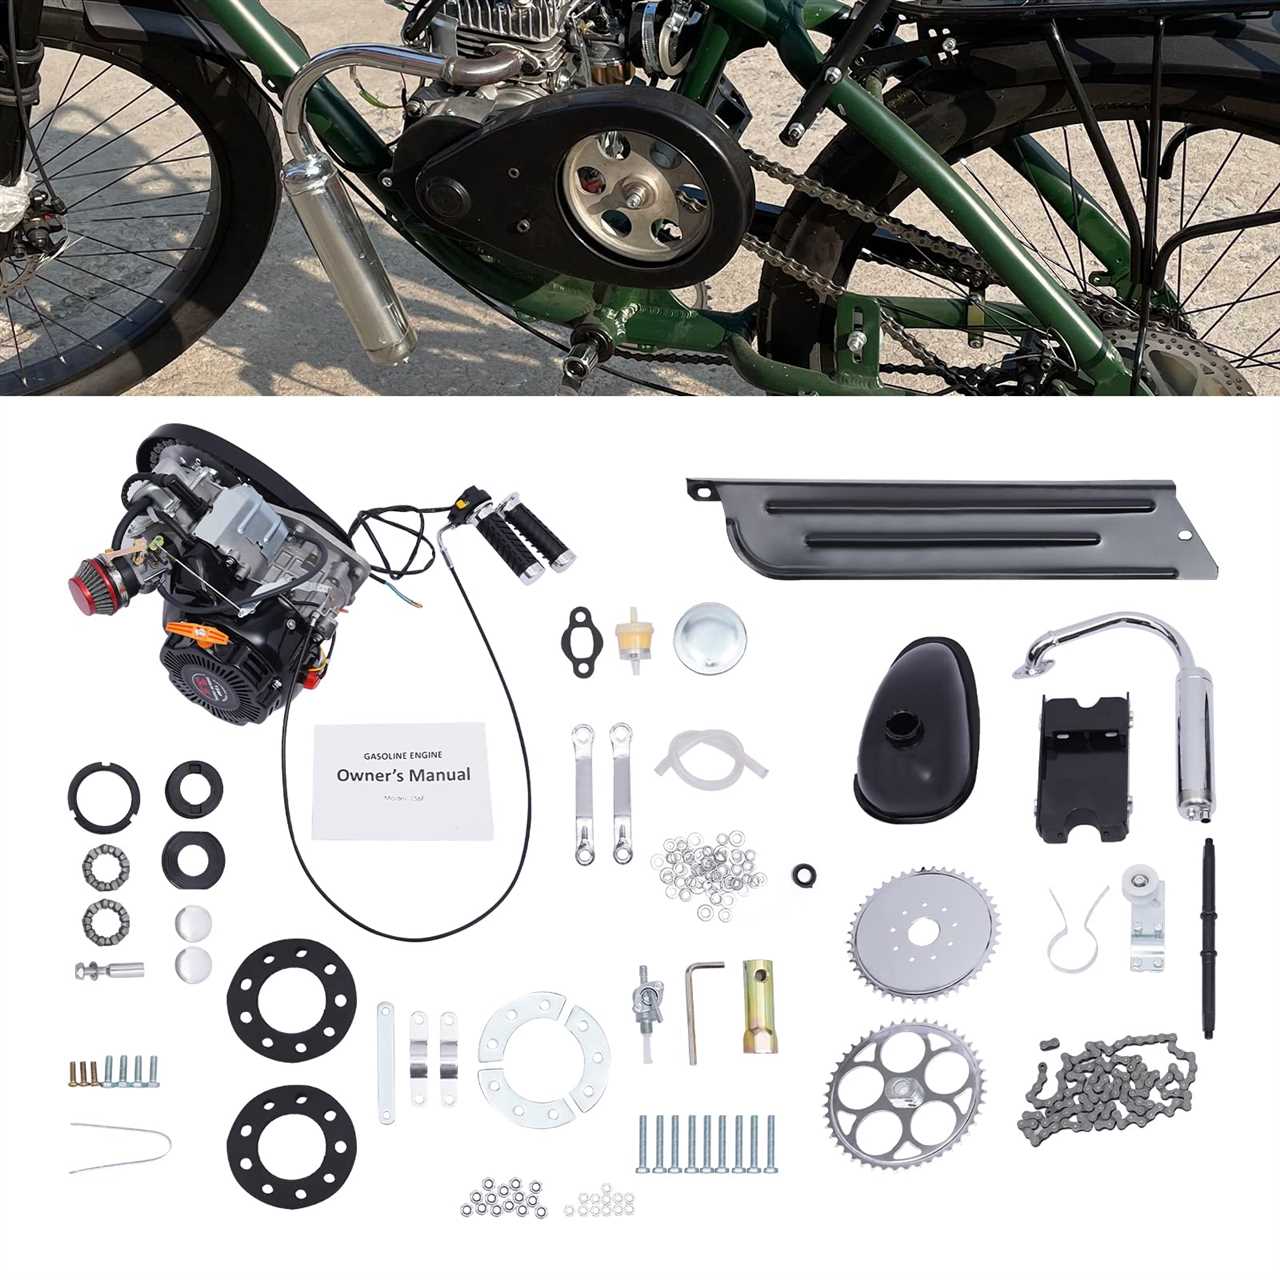 F-zero motorized bike + 4 The Ultimate Guide for Bike Enthusiasts